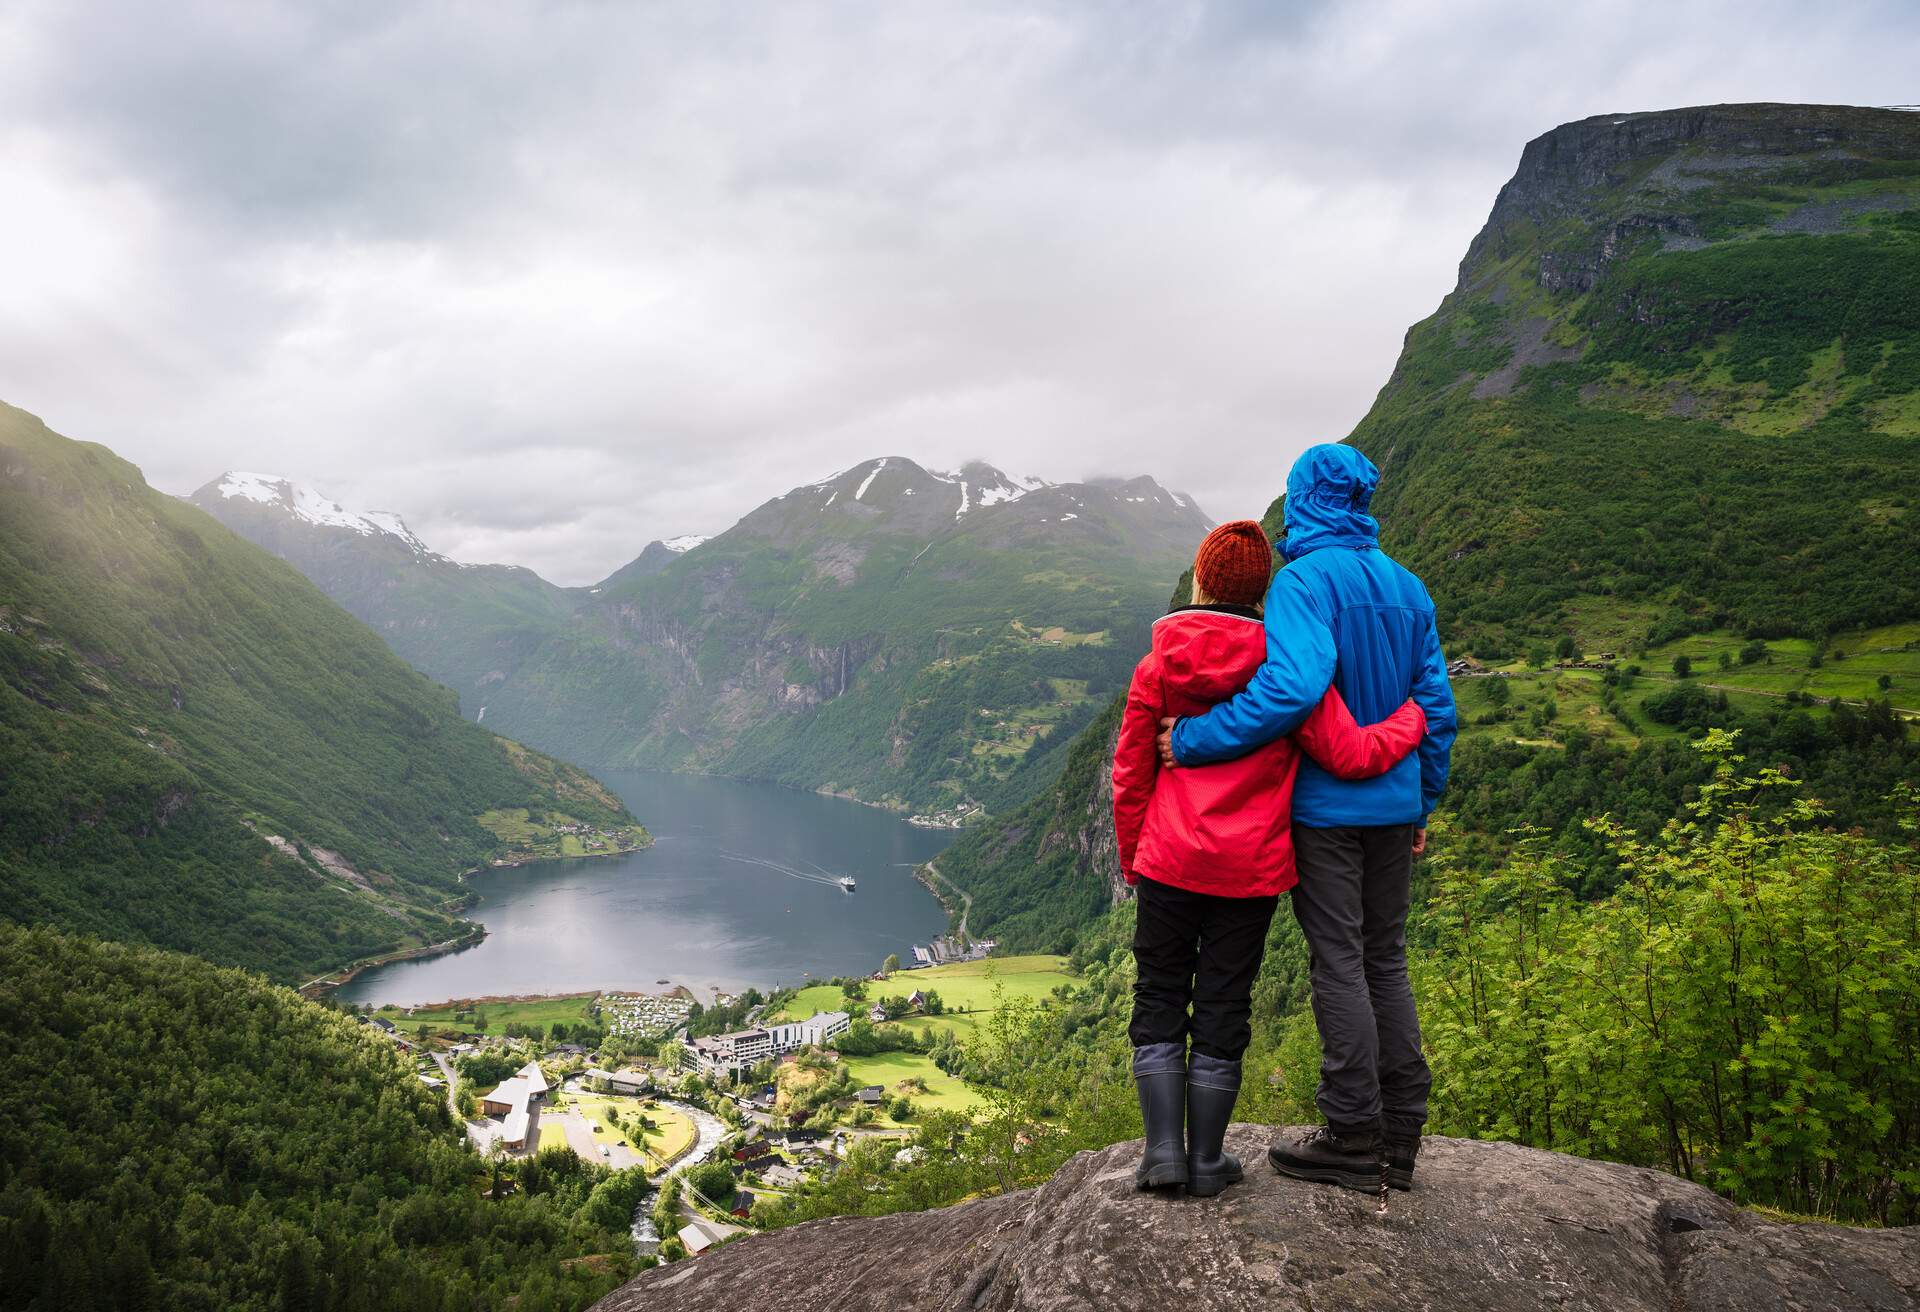 Couple sitting on a rock with looking at the fjord and mountains. Tourist village of Geiranger and the Geirangerfjord, Norway